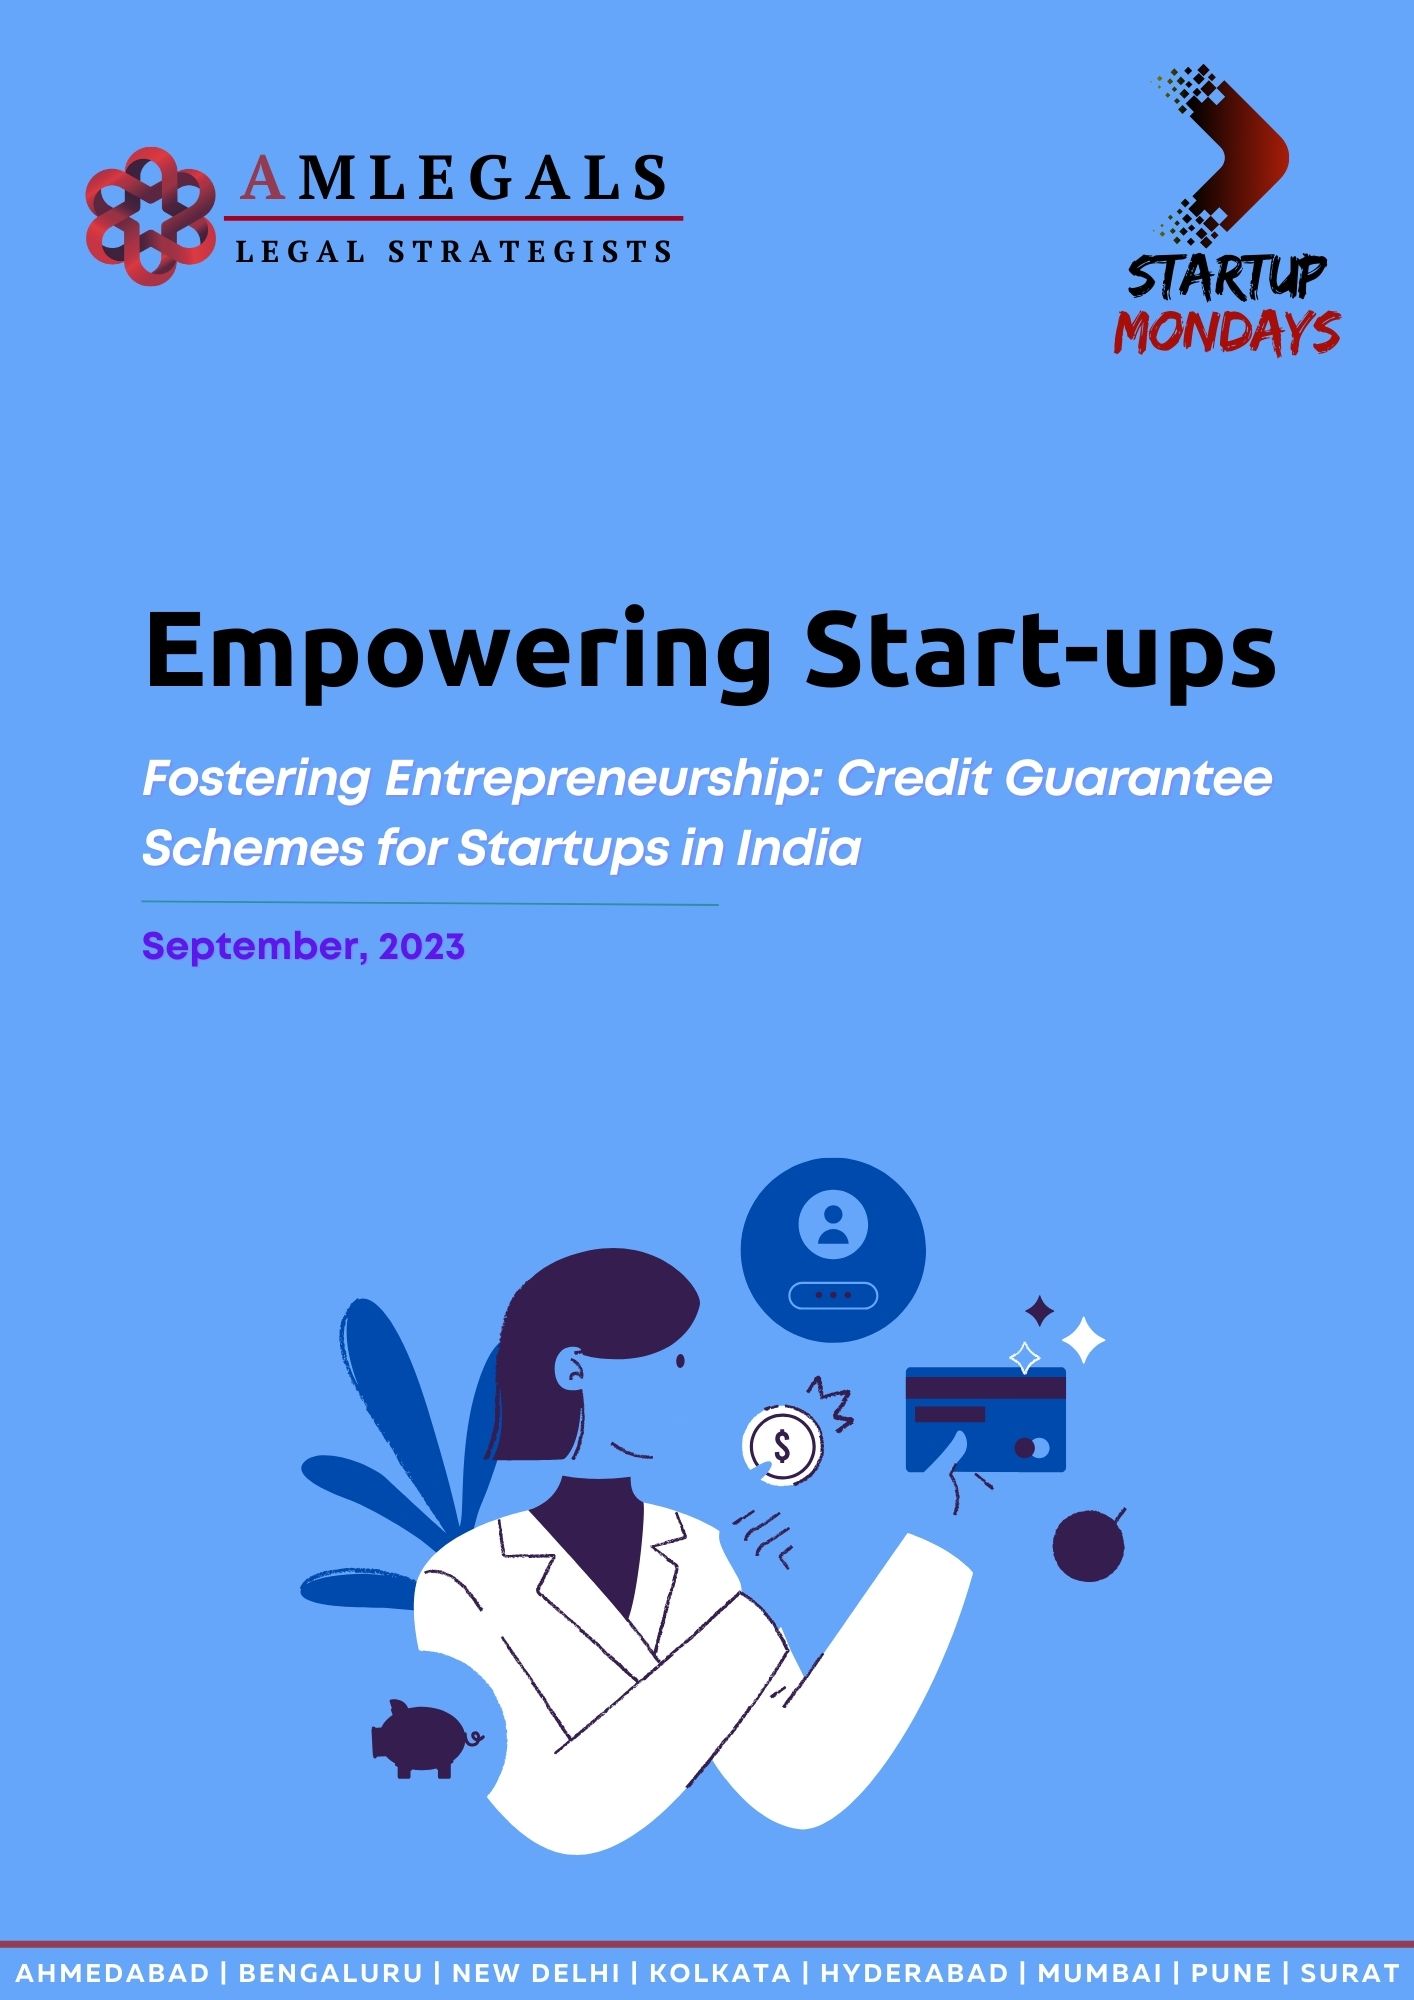 Fostering Entrepreneurship: Credit Guarantee Schemes for Startups in India